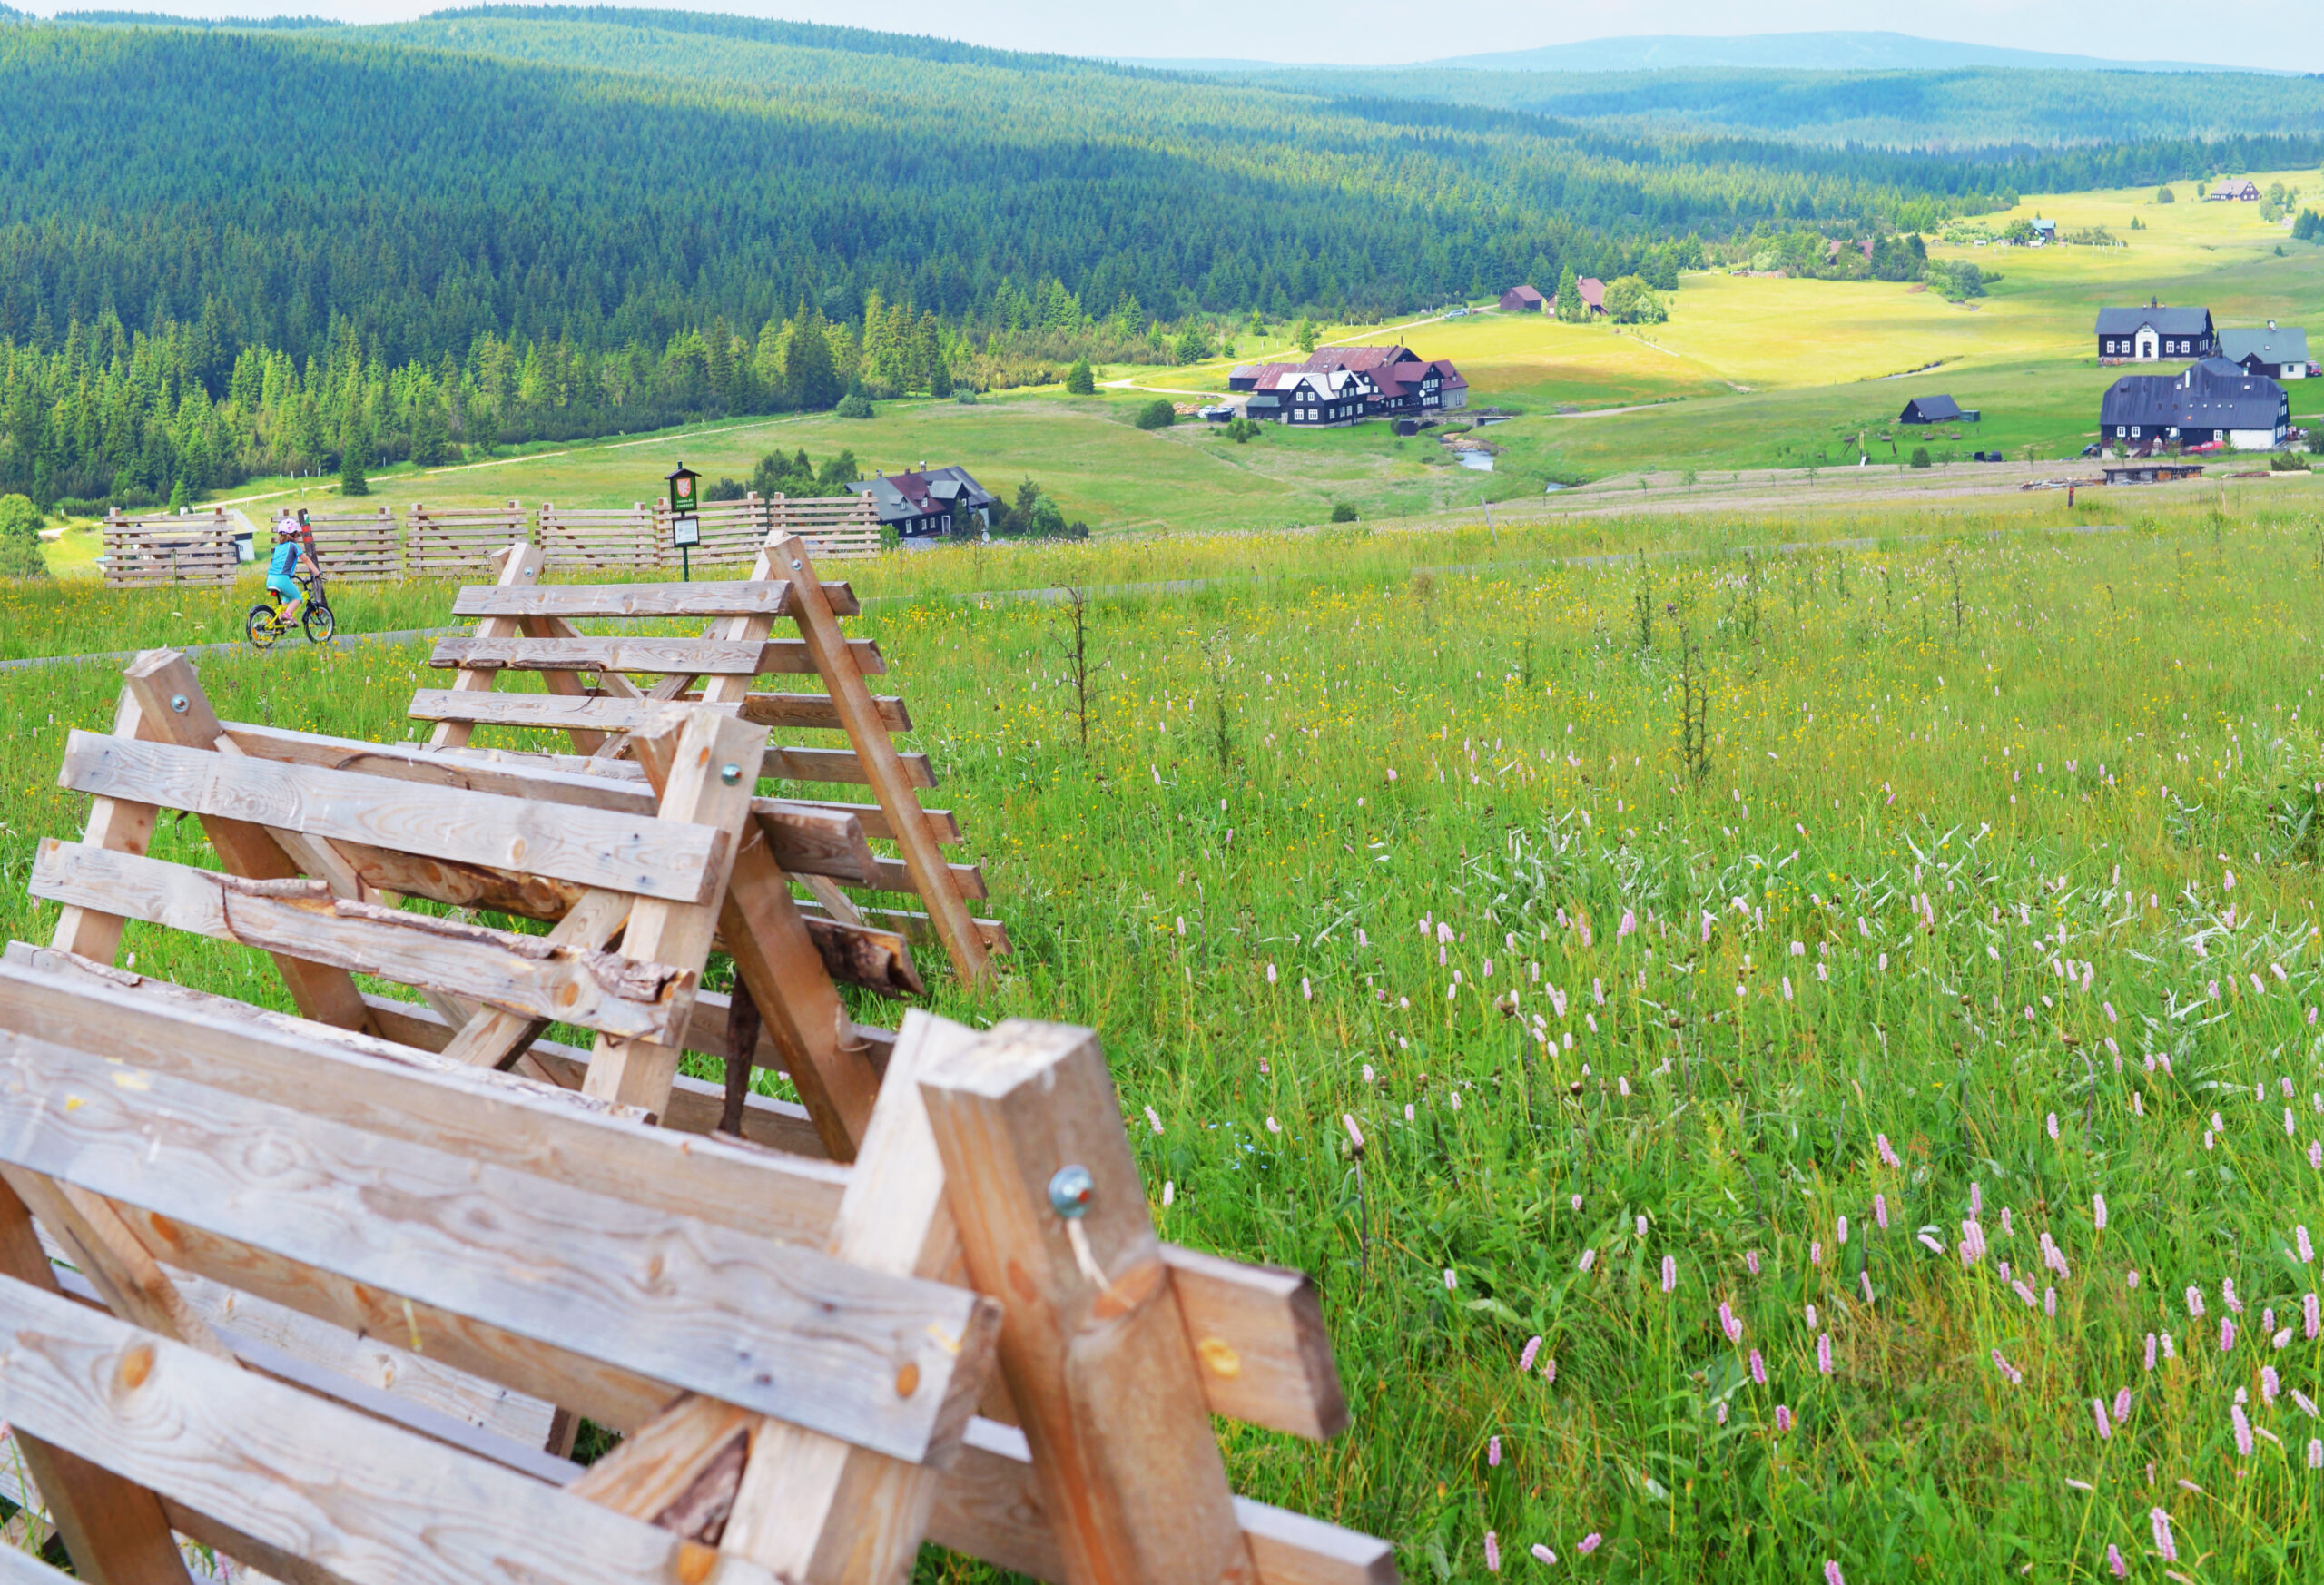 Jizera mountains in summer season. The hills are covered with forests and meadows. A child rides a bike.